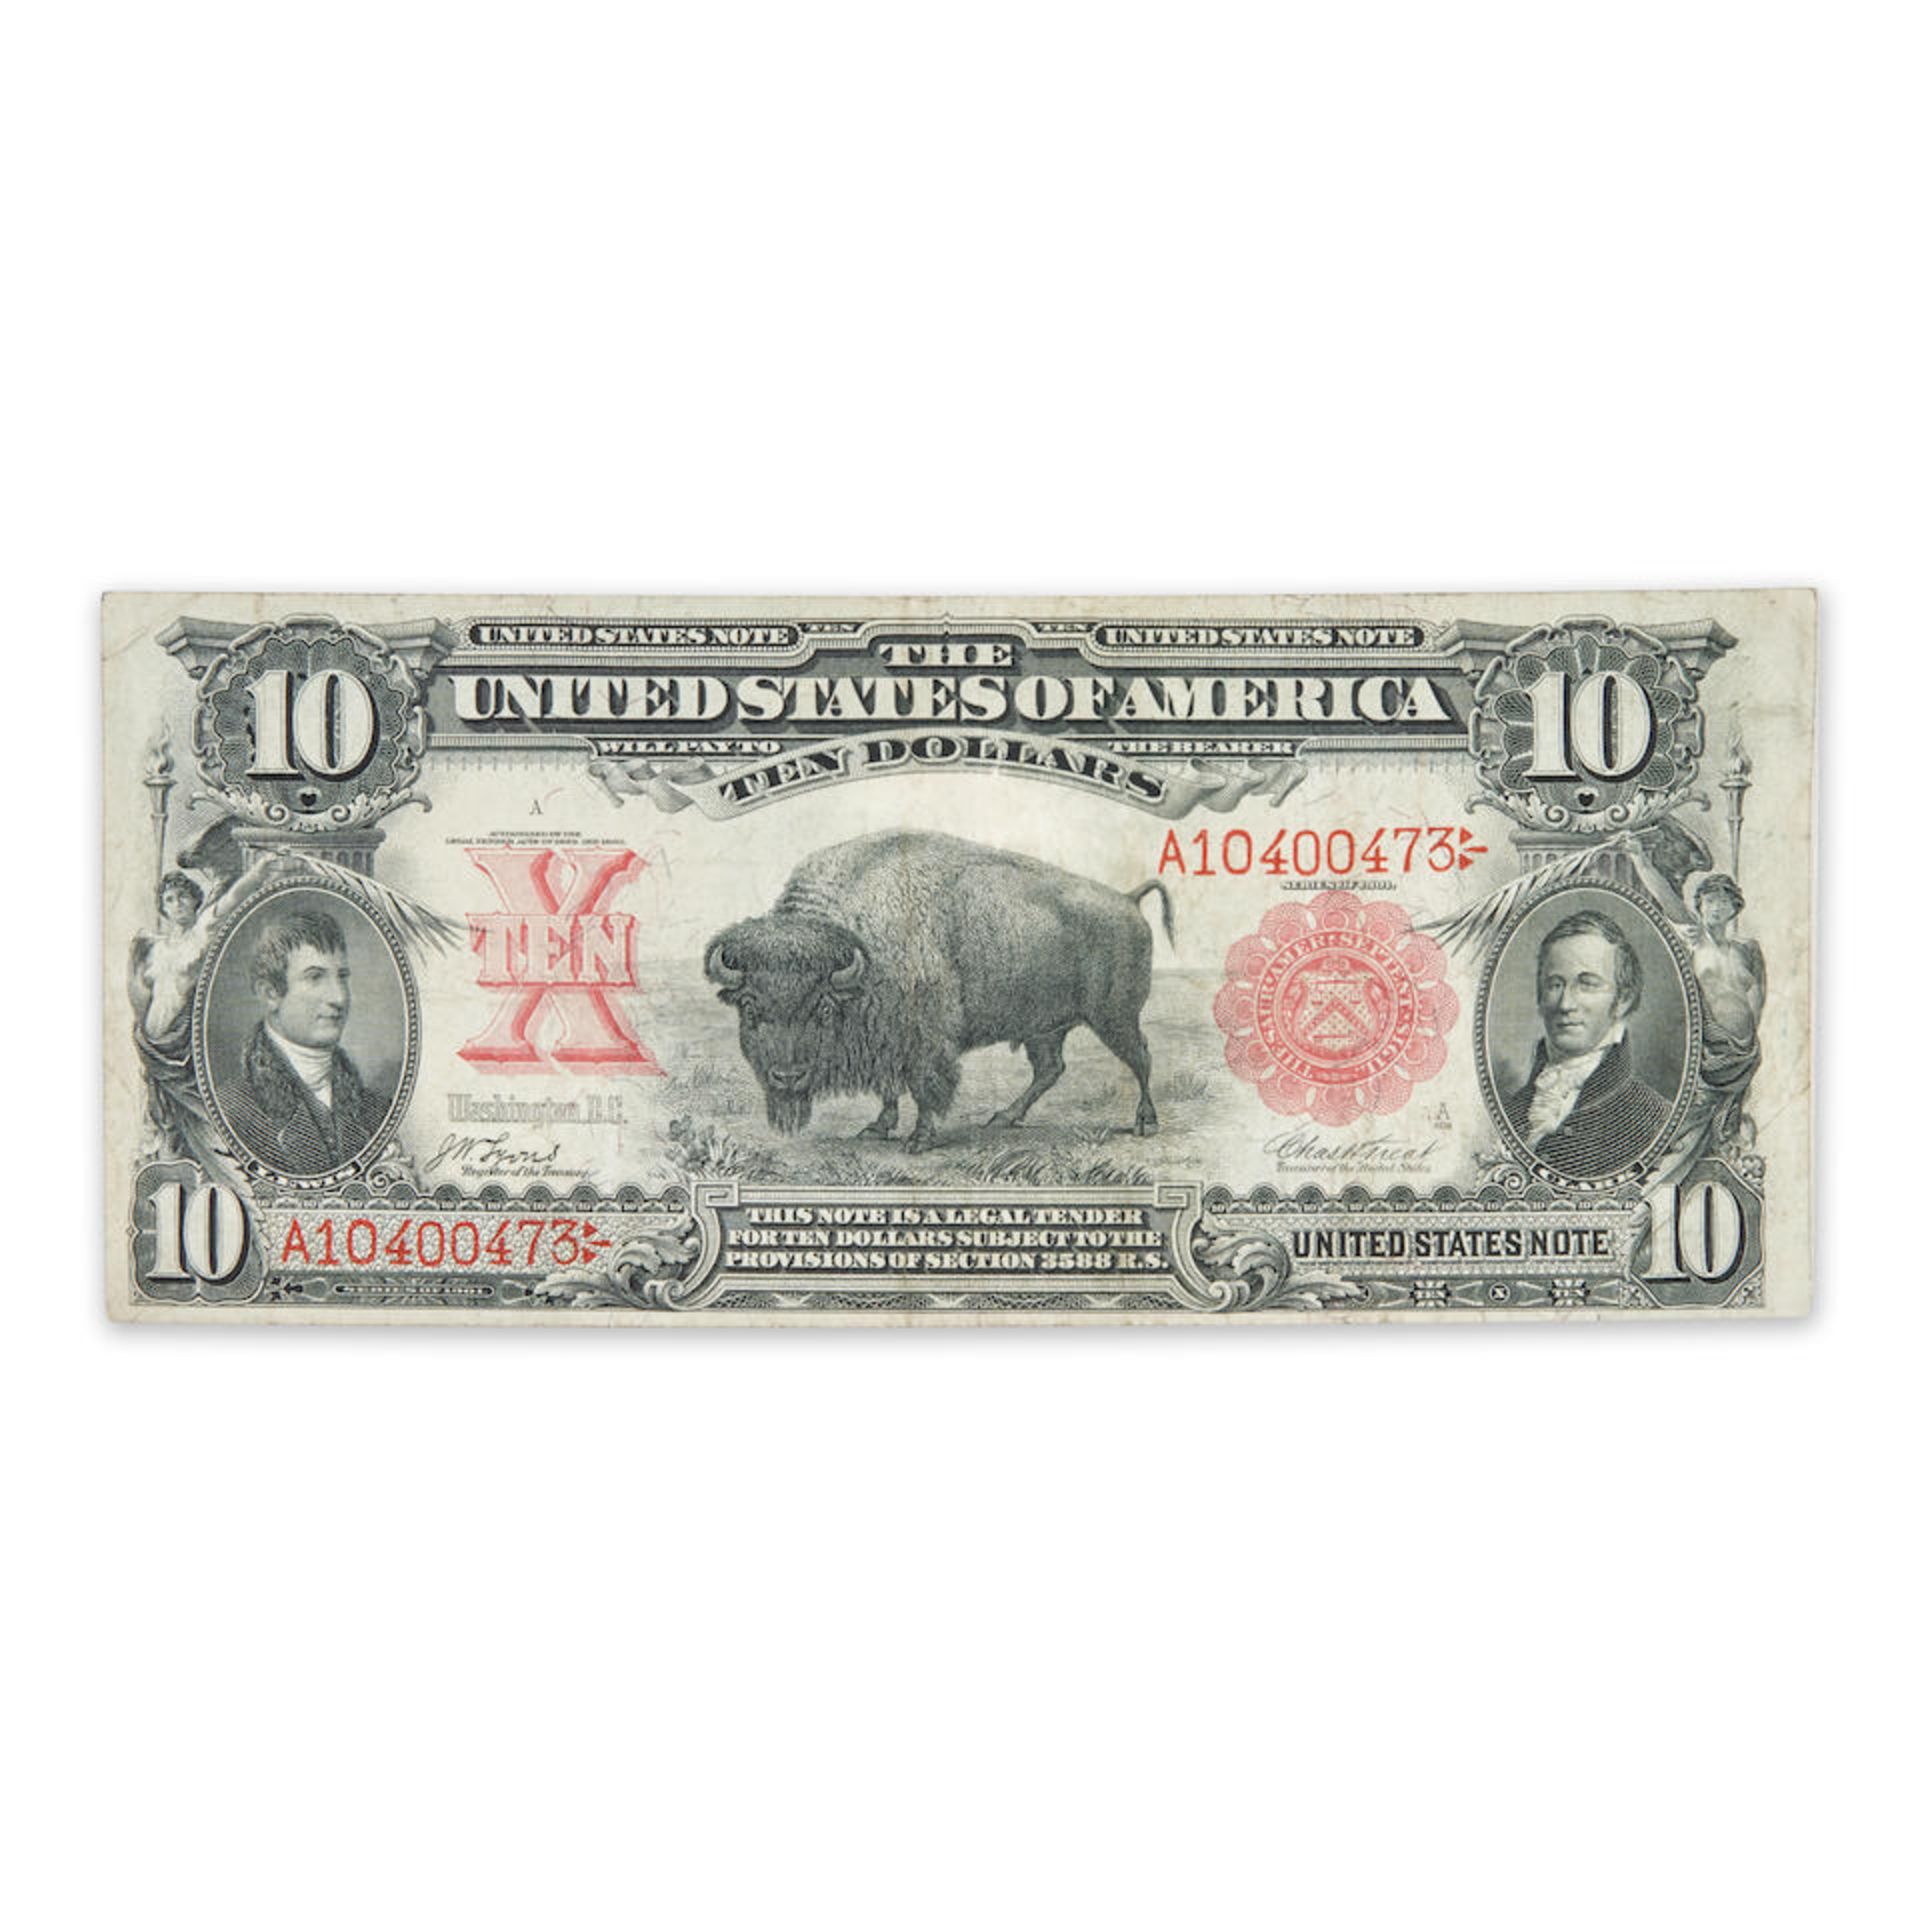 United States $10 Legal Tender Note.